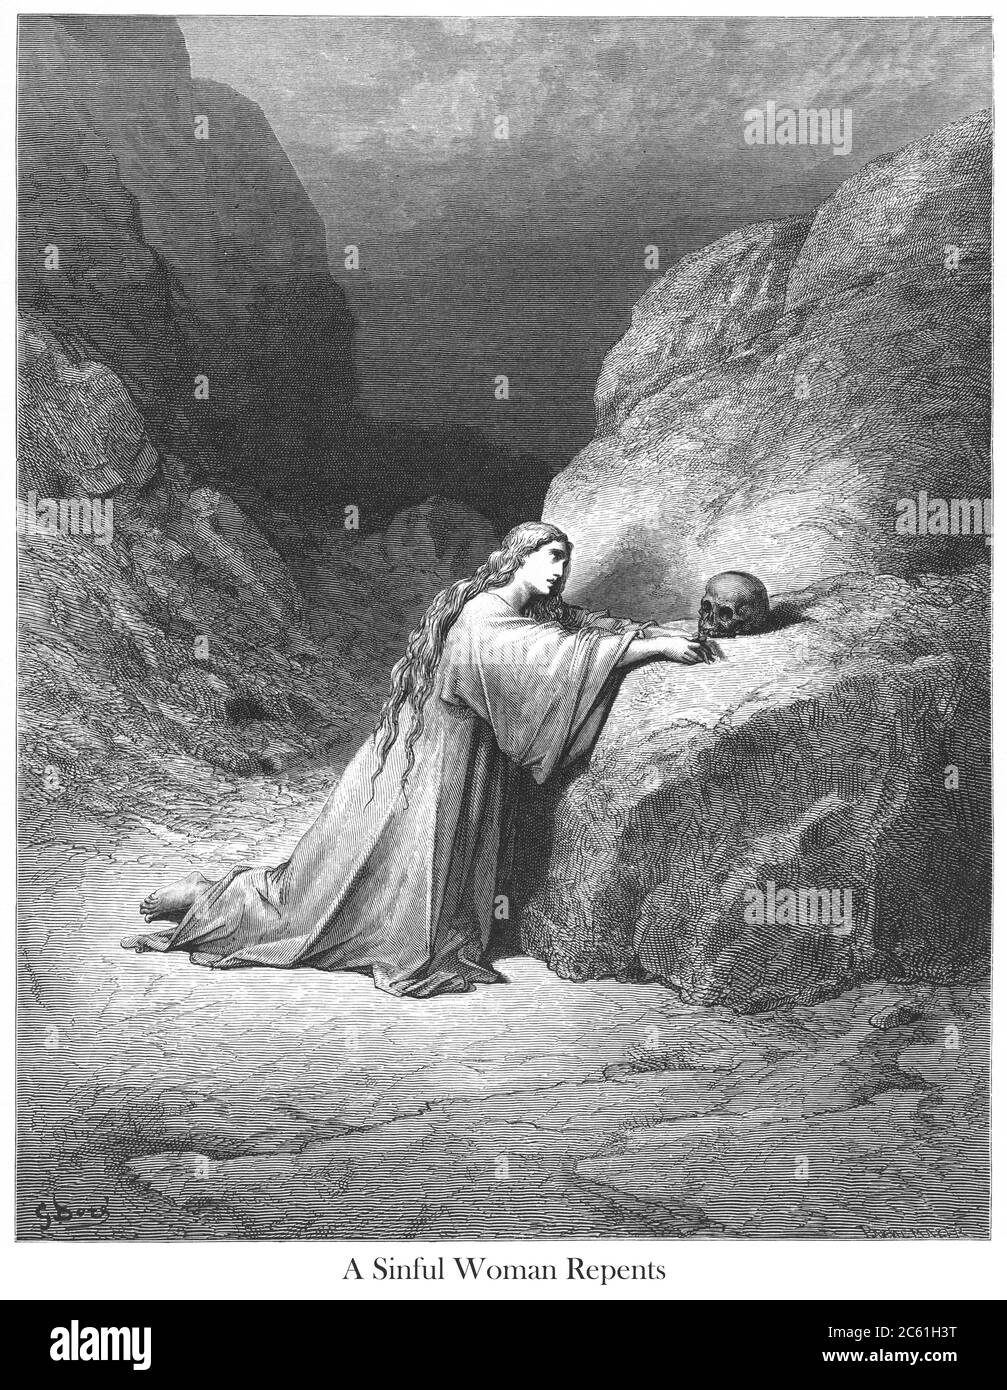 Mary Magdalene Repentant [Luke 8:2] From the book 'Bible Gallery' Illustrated by Gustave Dore with Memoir of Dore and Descriptive Letter-press by Talbot W. Chambers D.D. Published by Cassell & Company Limited in London and simultaneously by Mame in Tours, France in 1866 Stock Photo